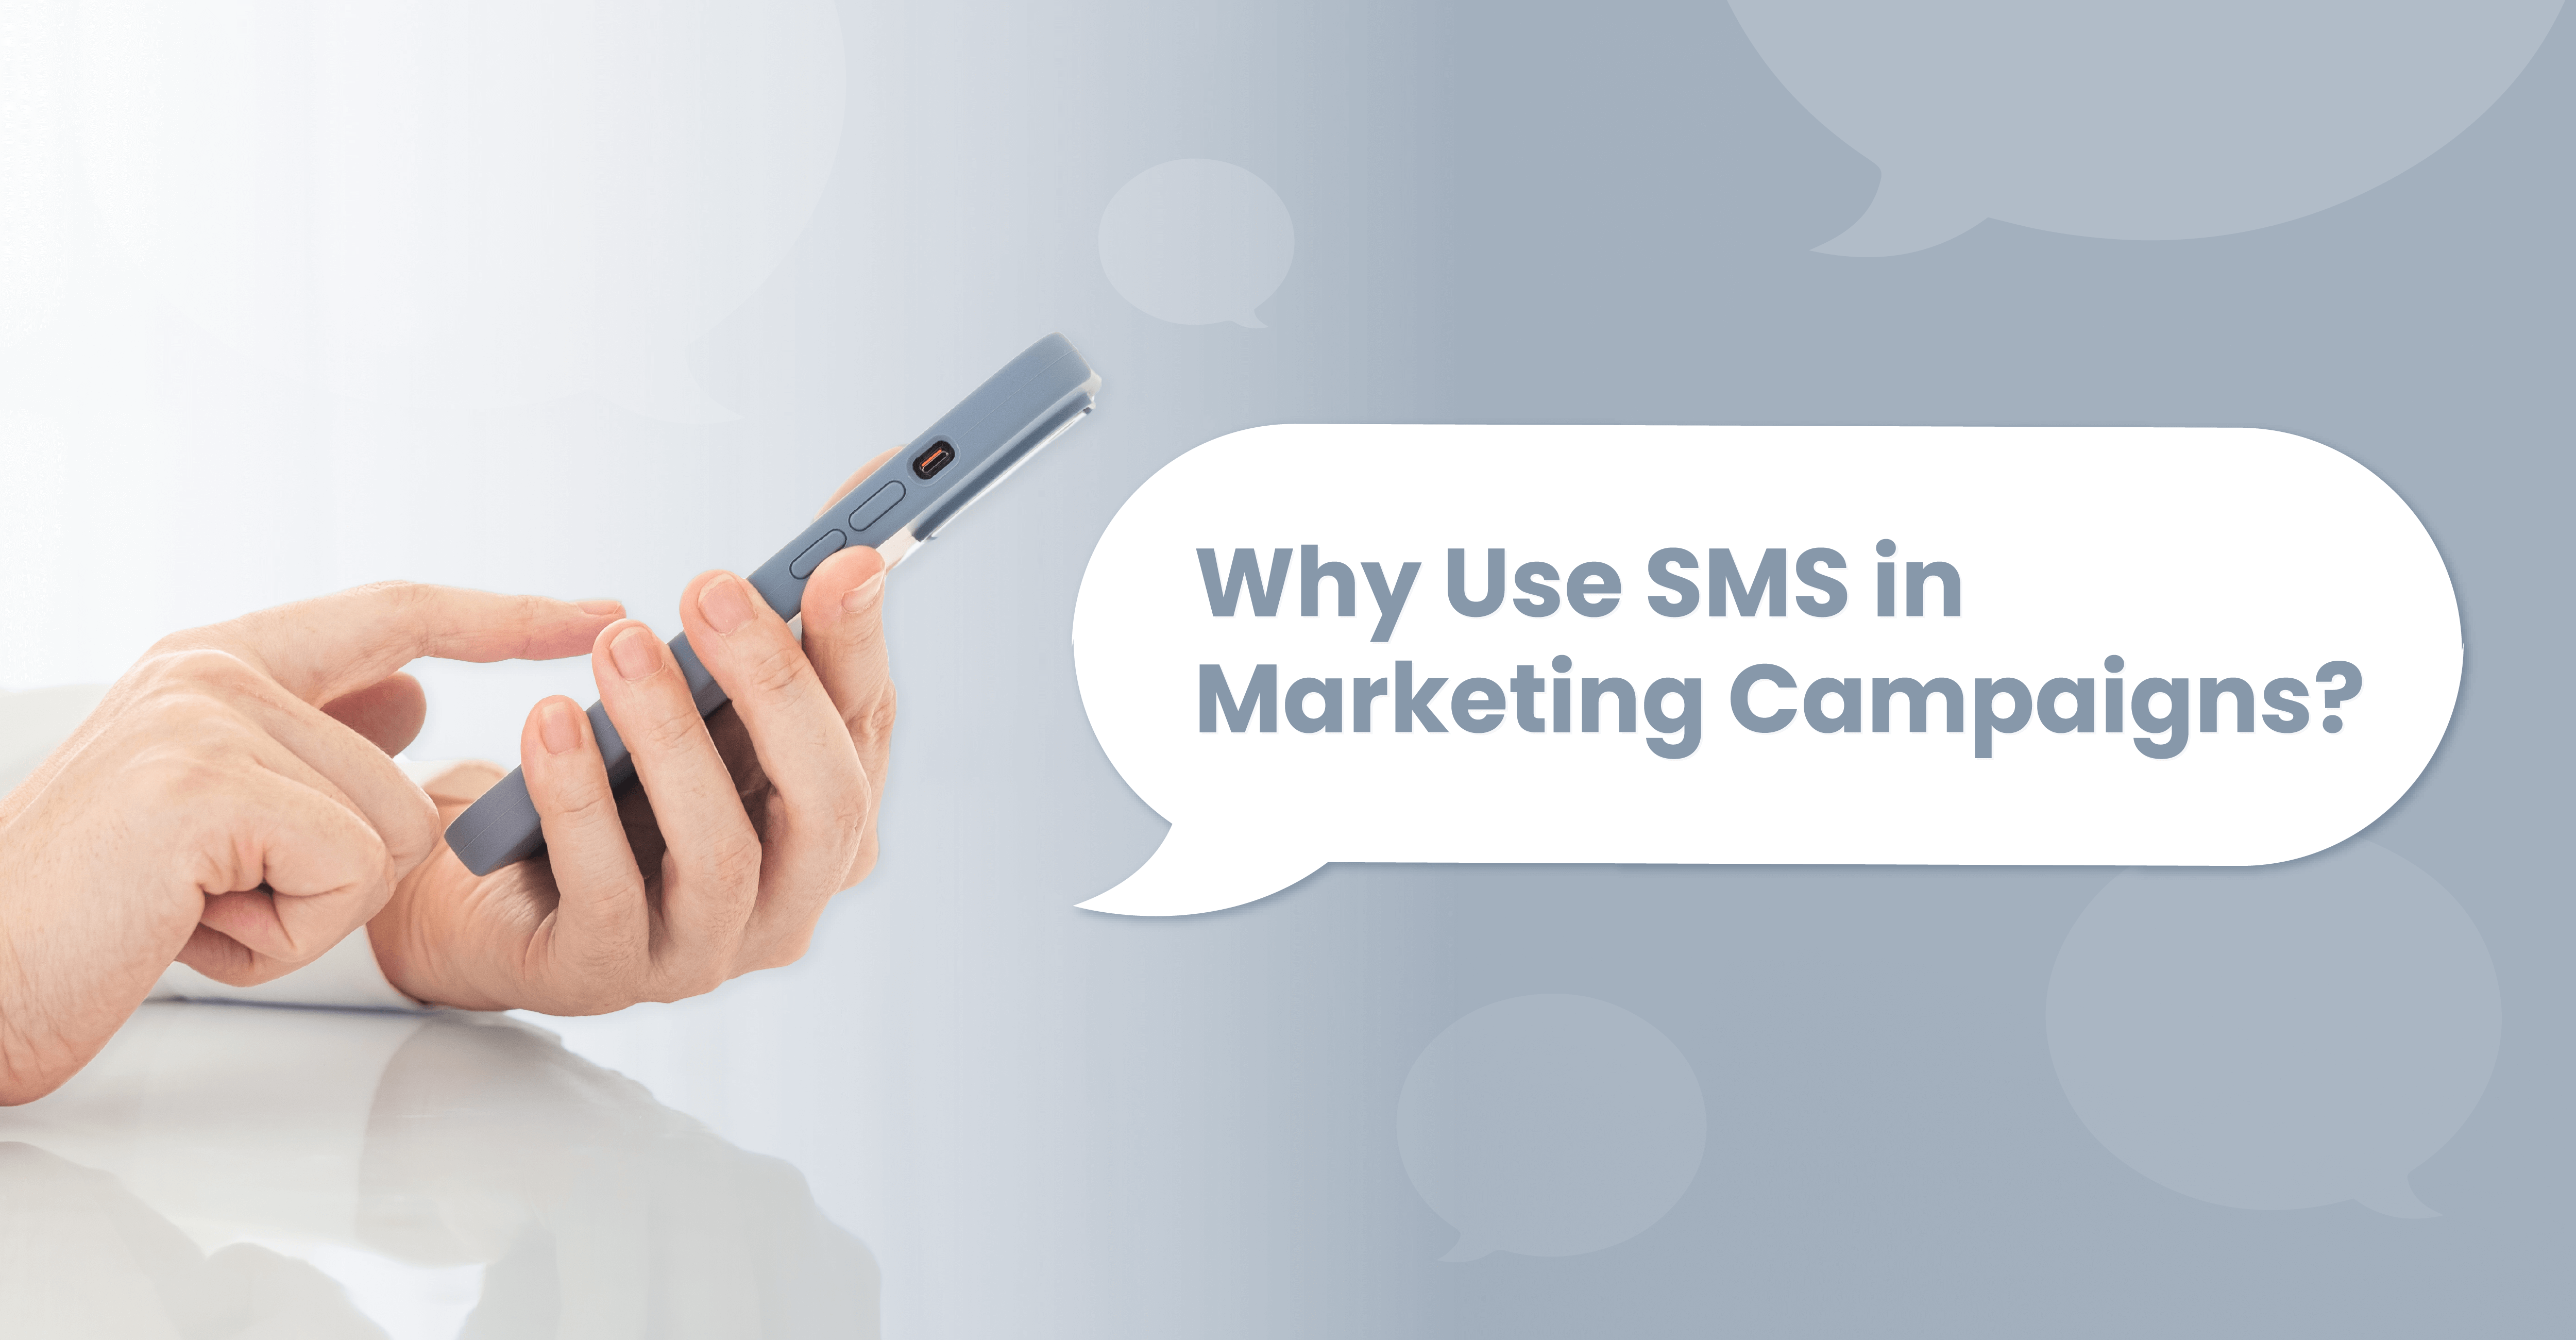 Why Use SMS in Marketing Campaigns?